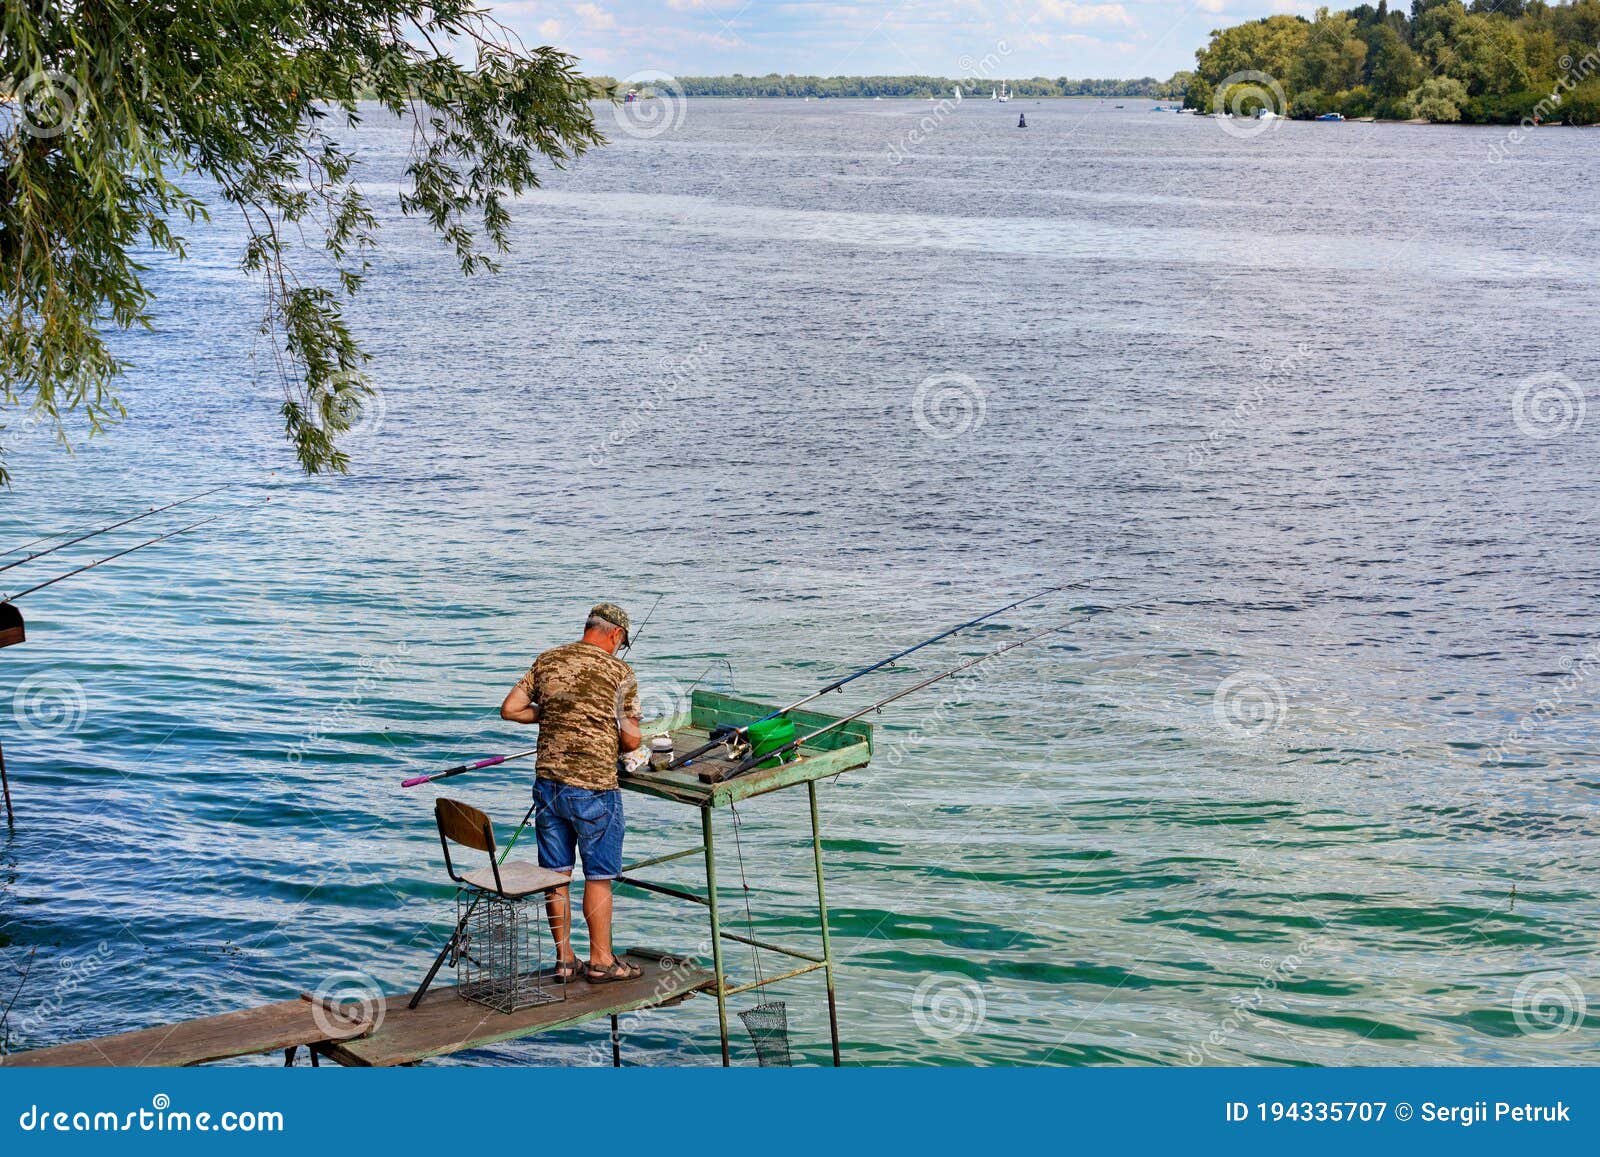 https://thumbs.dreamstime.com/z/fisherman-catches-fish-fishing-rods-river-bank-standing-wooden-platform-spinning-early-summer-morning-194335707.jpg